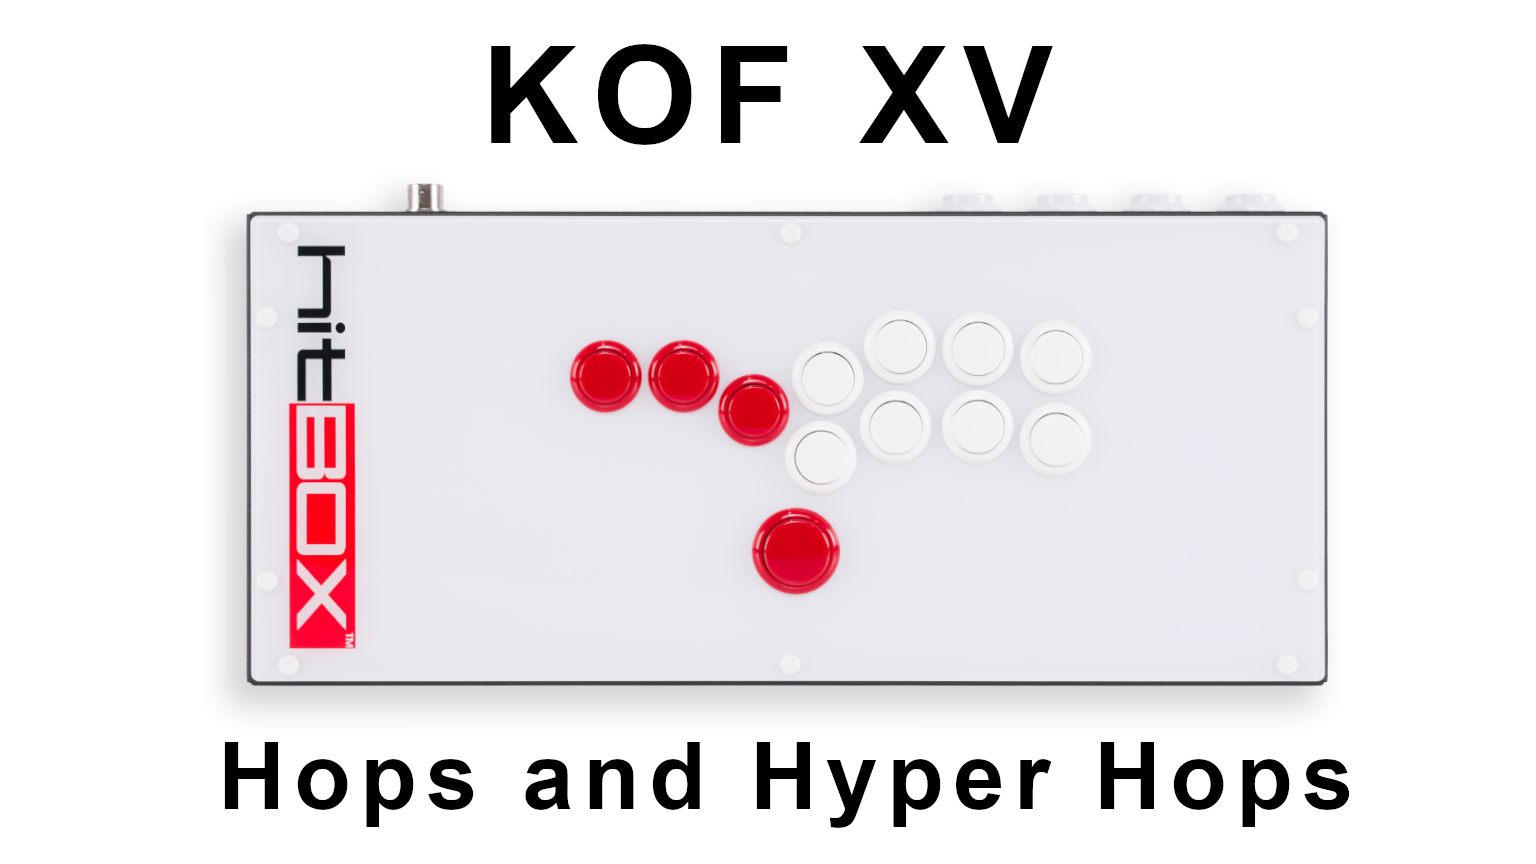 King of Fighters XV on Hit Box - Hops